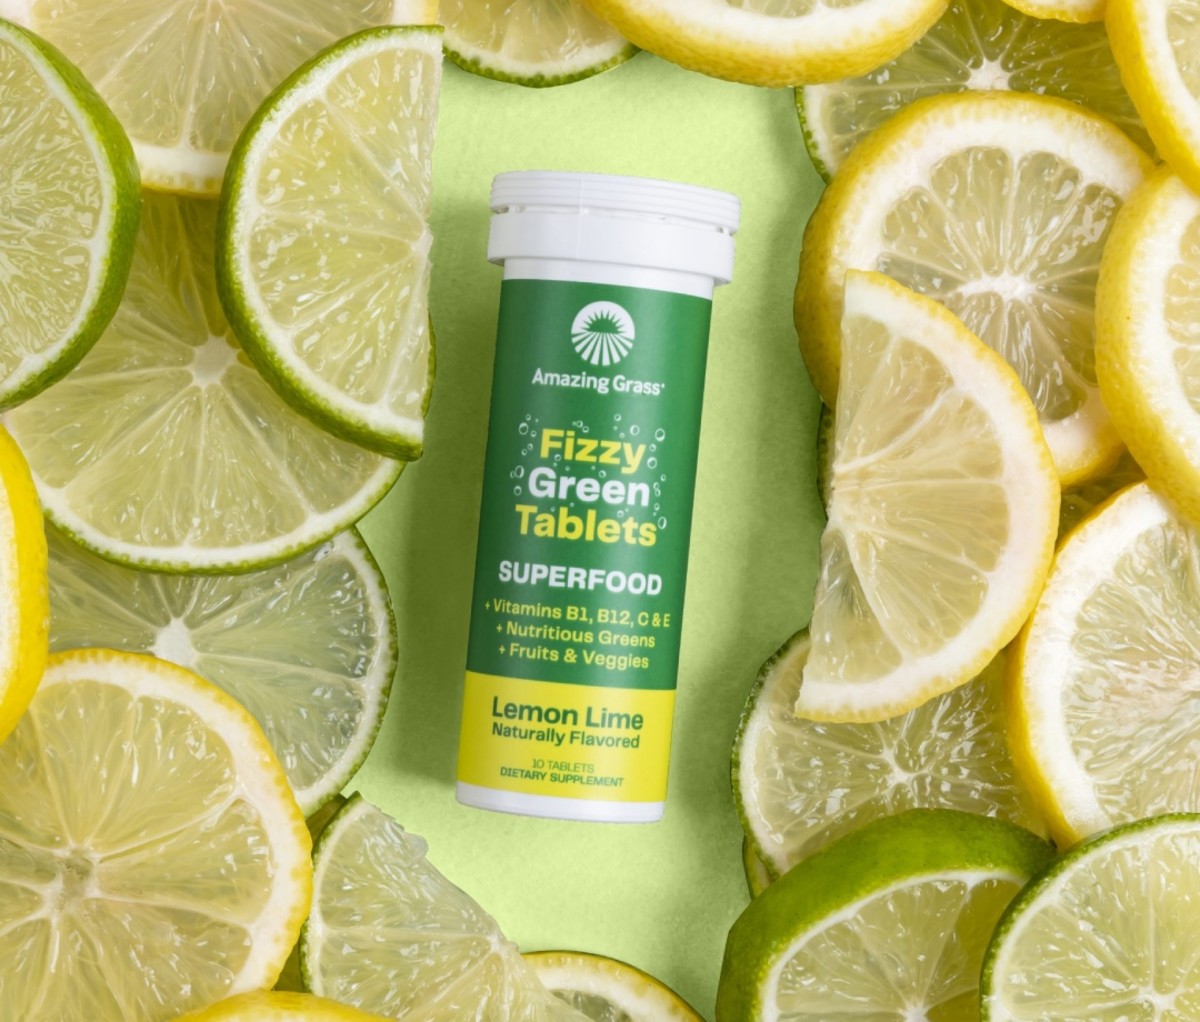 Bottle of Amazing Grass Fizzy Green Tablets with limes and lemons surrounding it